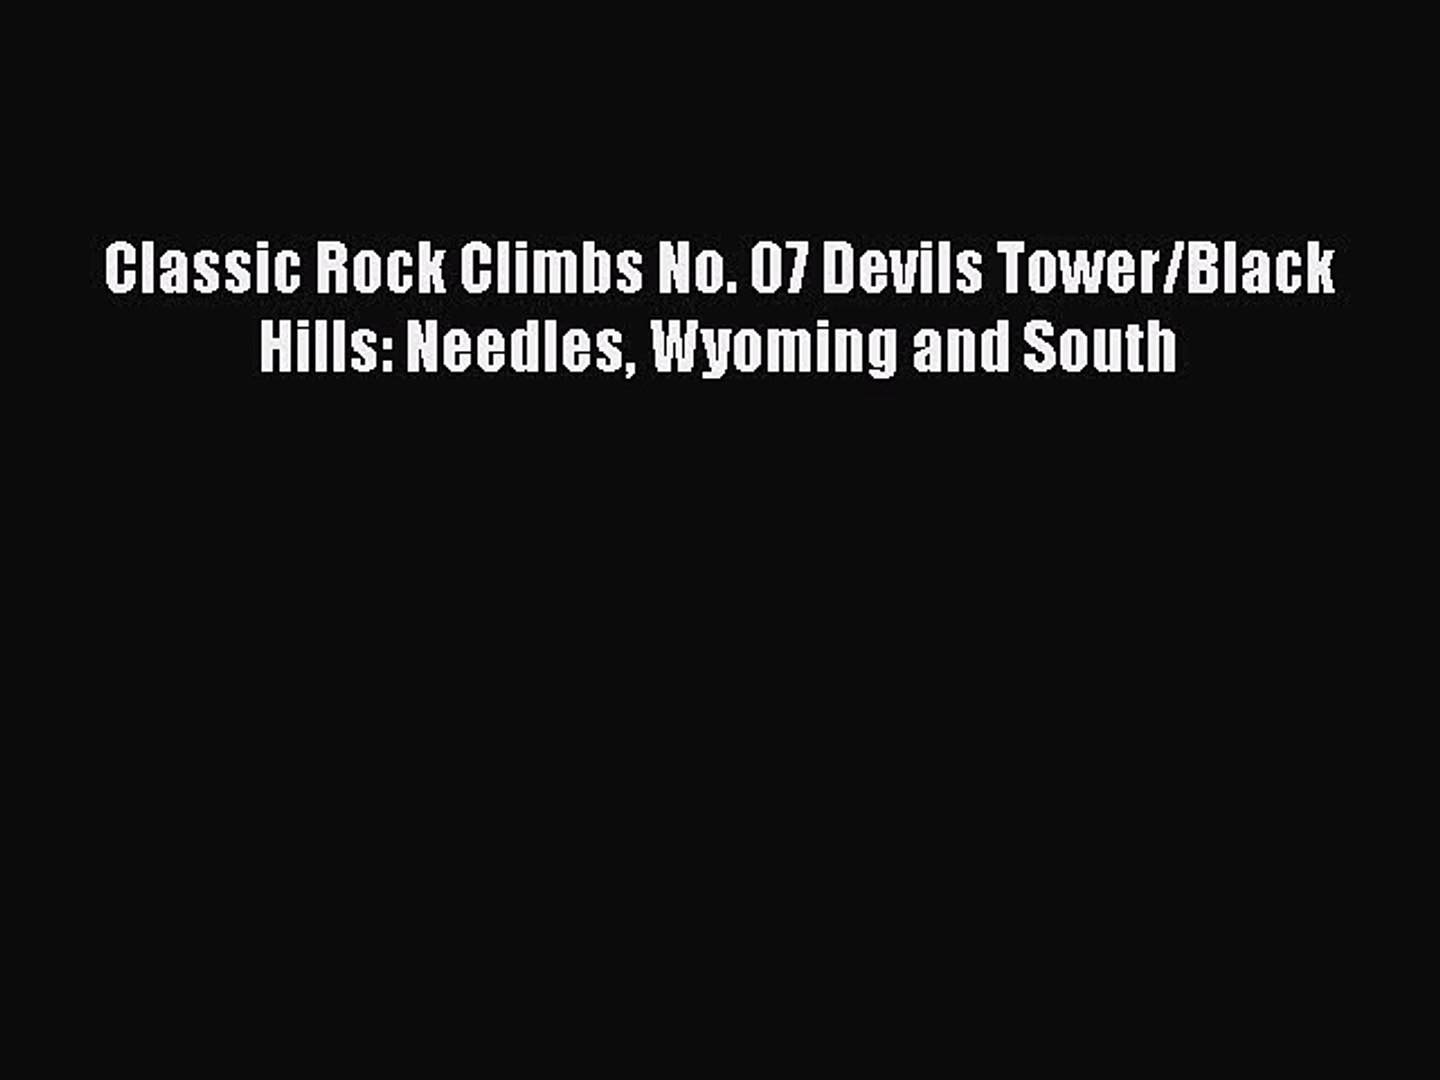 Read Classic Rock Climbs No. 07 Devils Tower/Black Hills: Needles Wyoming and South PDF Free